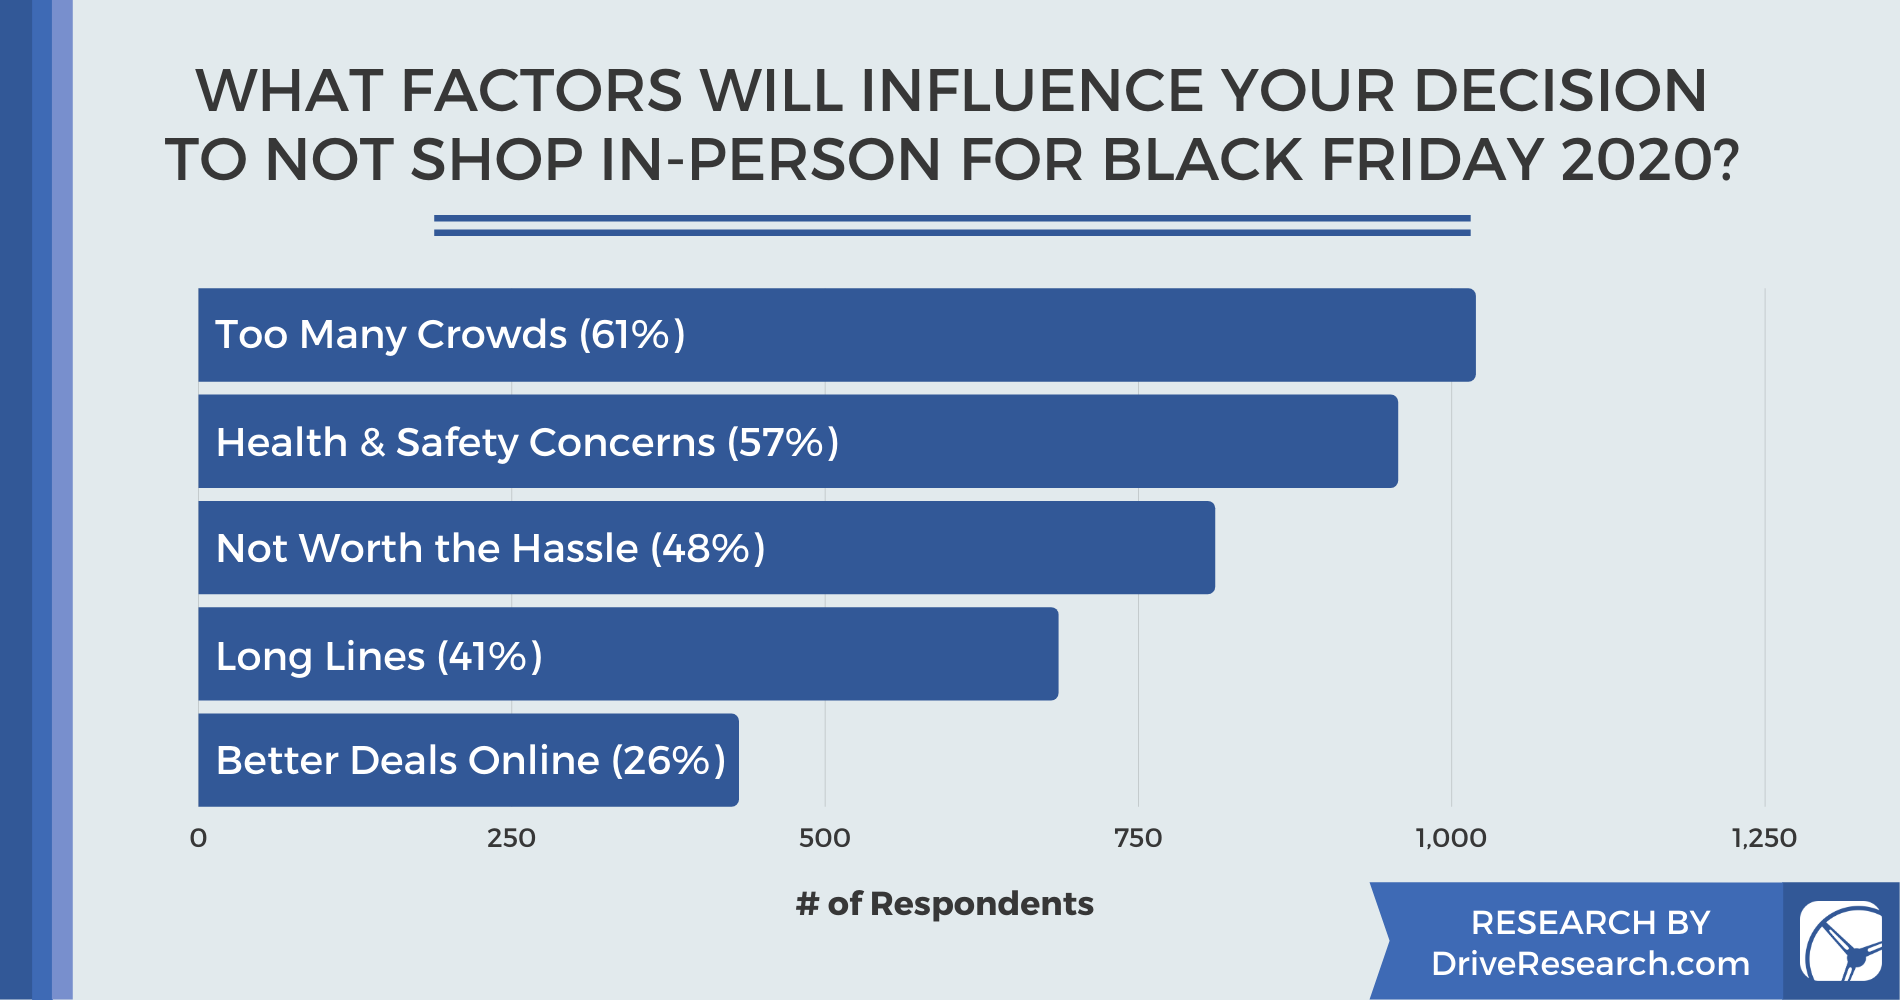 Reasons for Not Going Black Friday Shopping In-Person